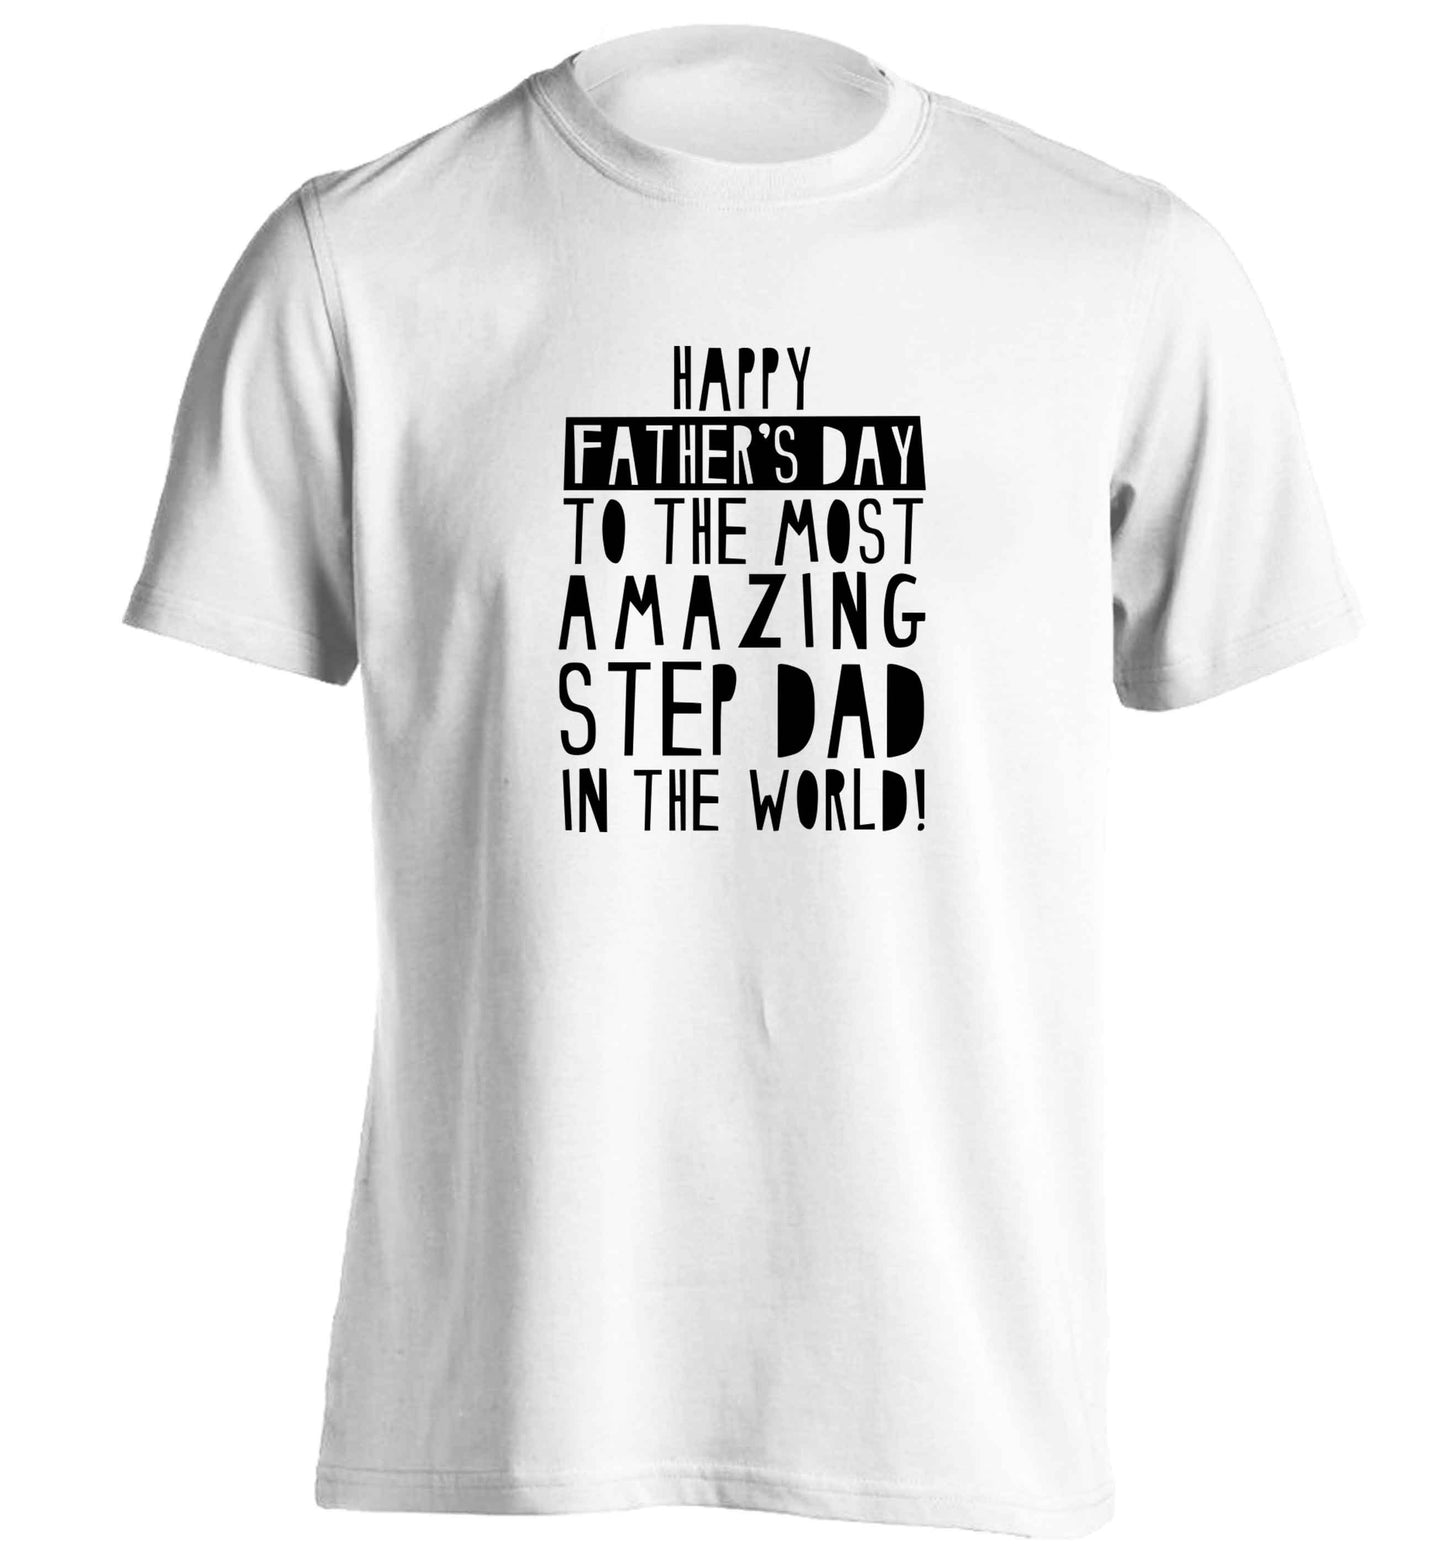 Happy Father's day to the best step dad in the world adults unisex white Tshirt 2XL